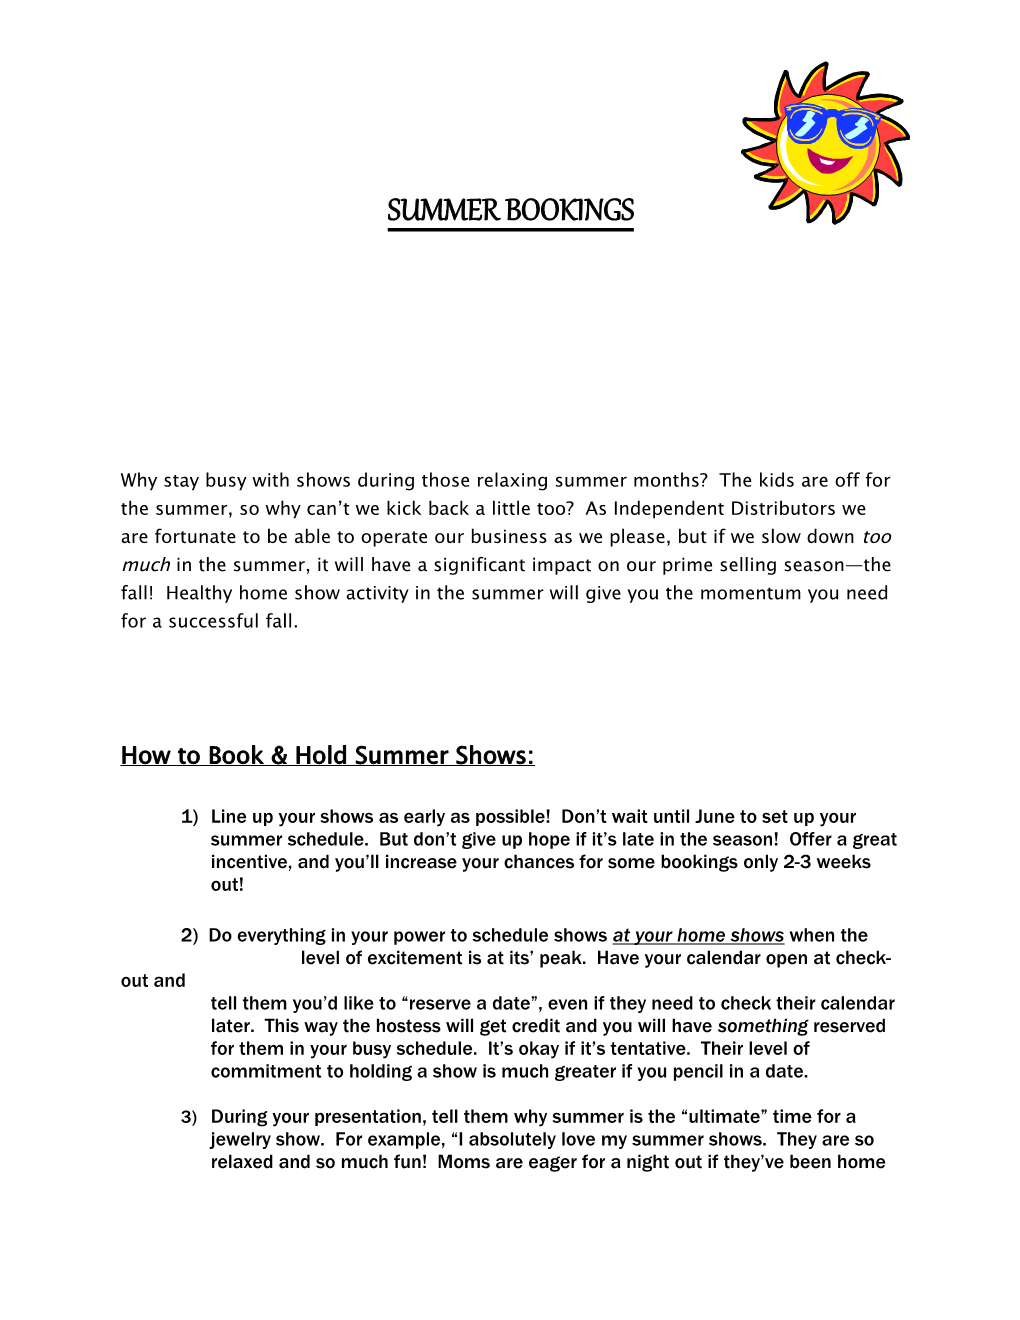 How to Book & Hold Summer Shows